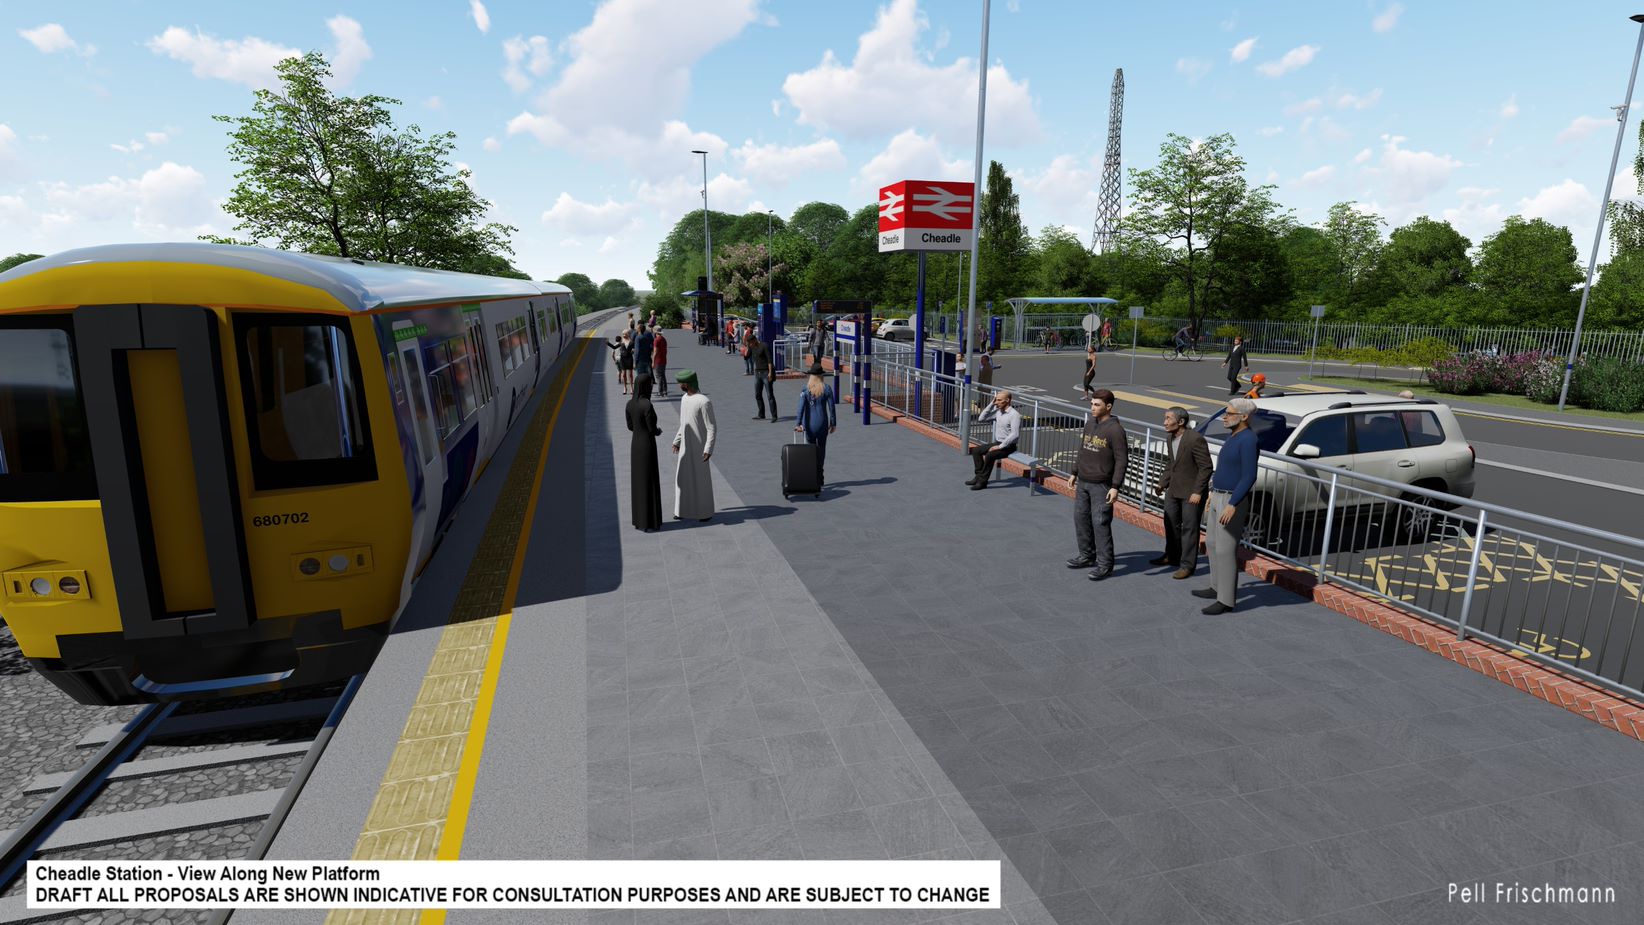 Funding for a new railway station at Cheadle approved